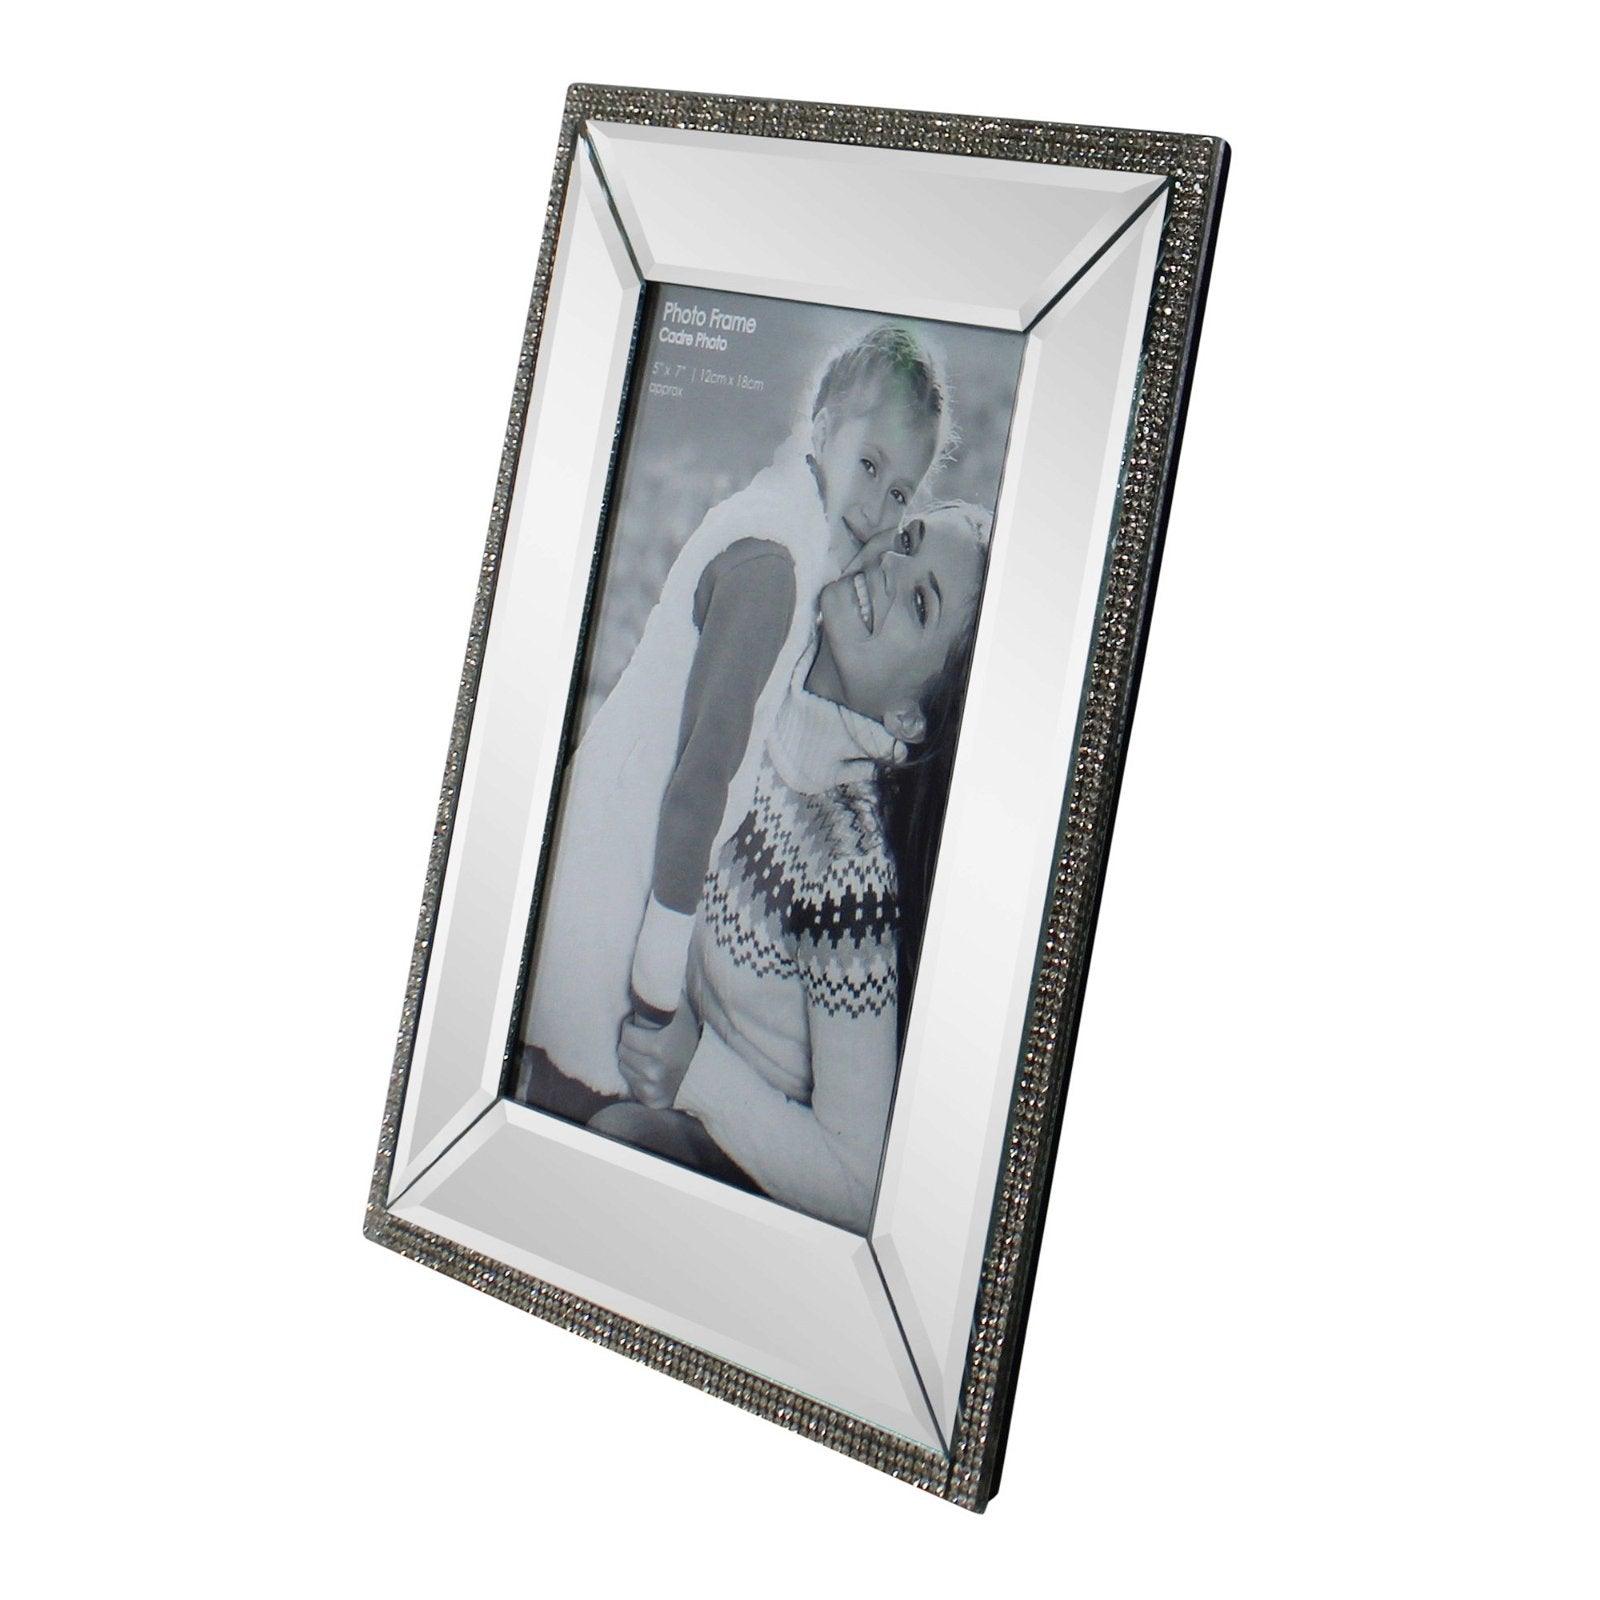 View 5 x 7 Mirrored Freestanding Photo Frame With Crystal Detail information